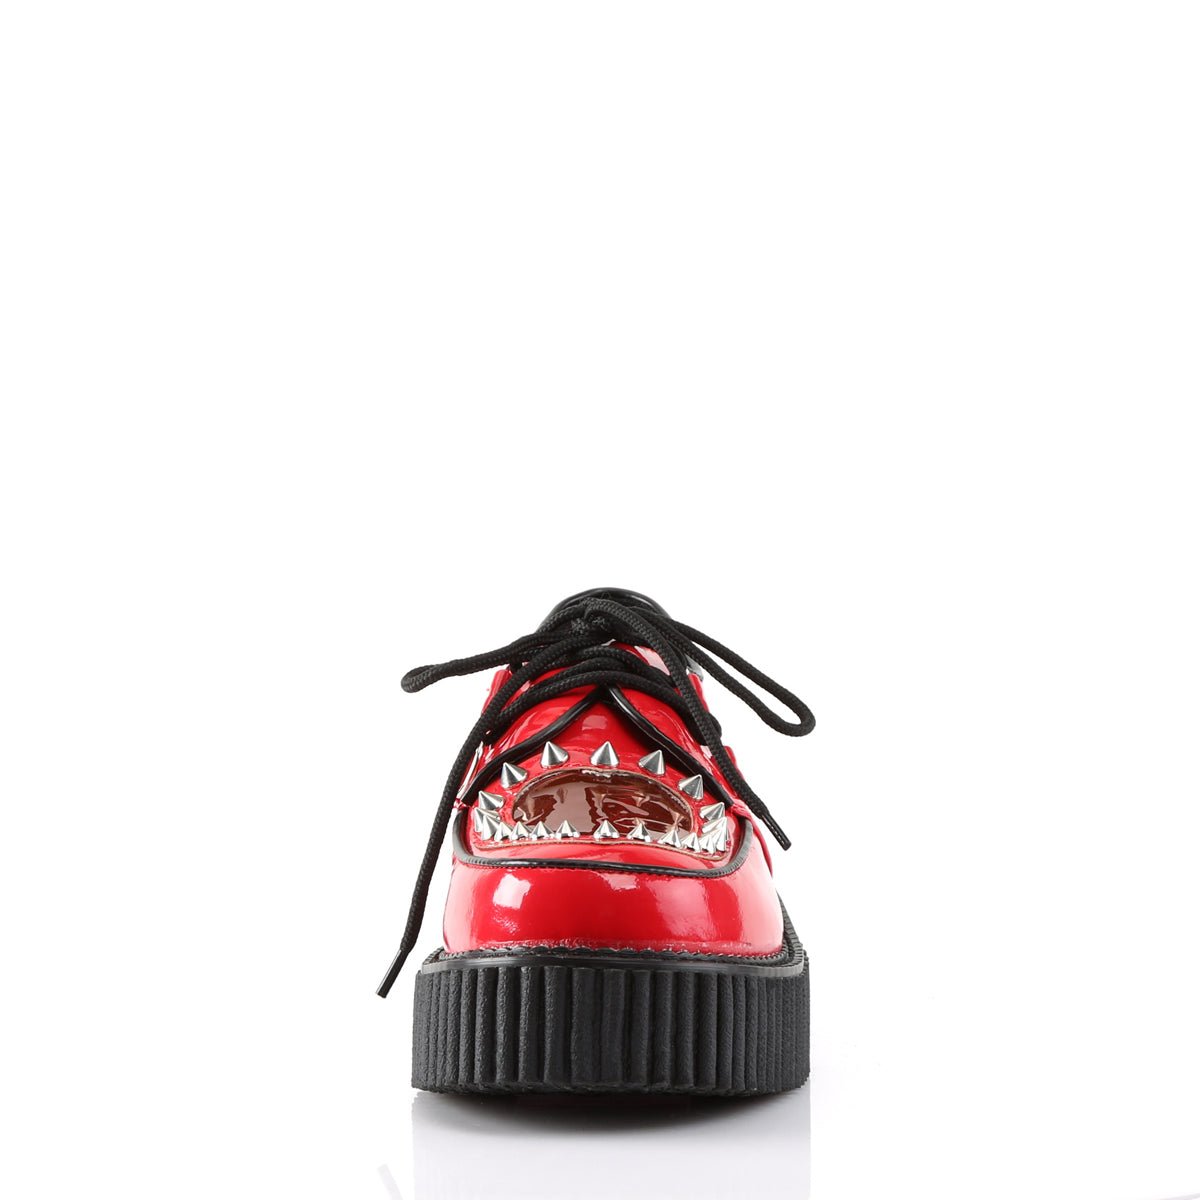 Too Fast | Demonia Creeper 108 | Red Patent Leather &amp; Pvc Women&#39;s Creepers